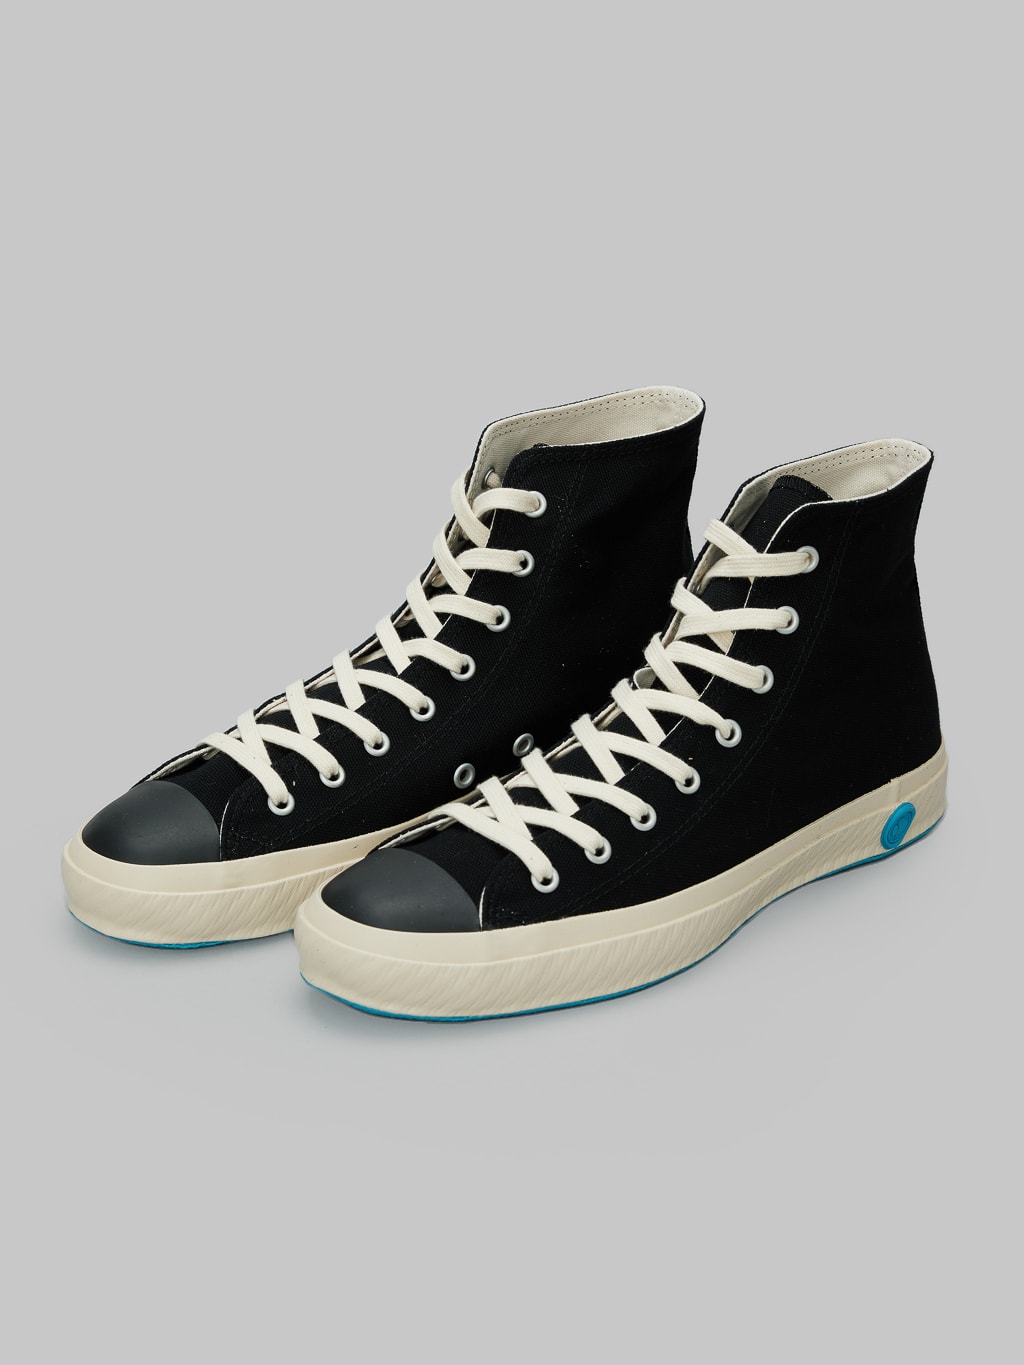 Shoes like pottery high sneaker black made in japan